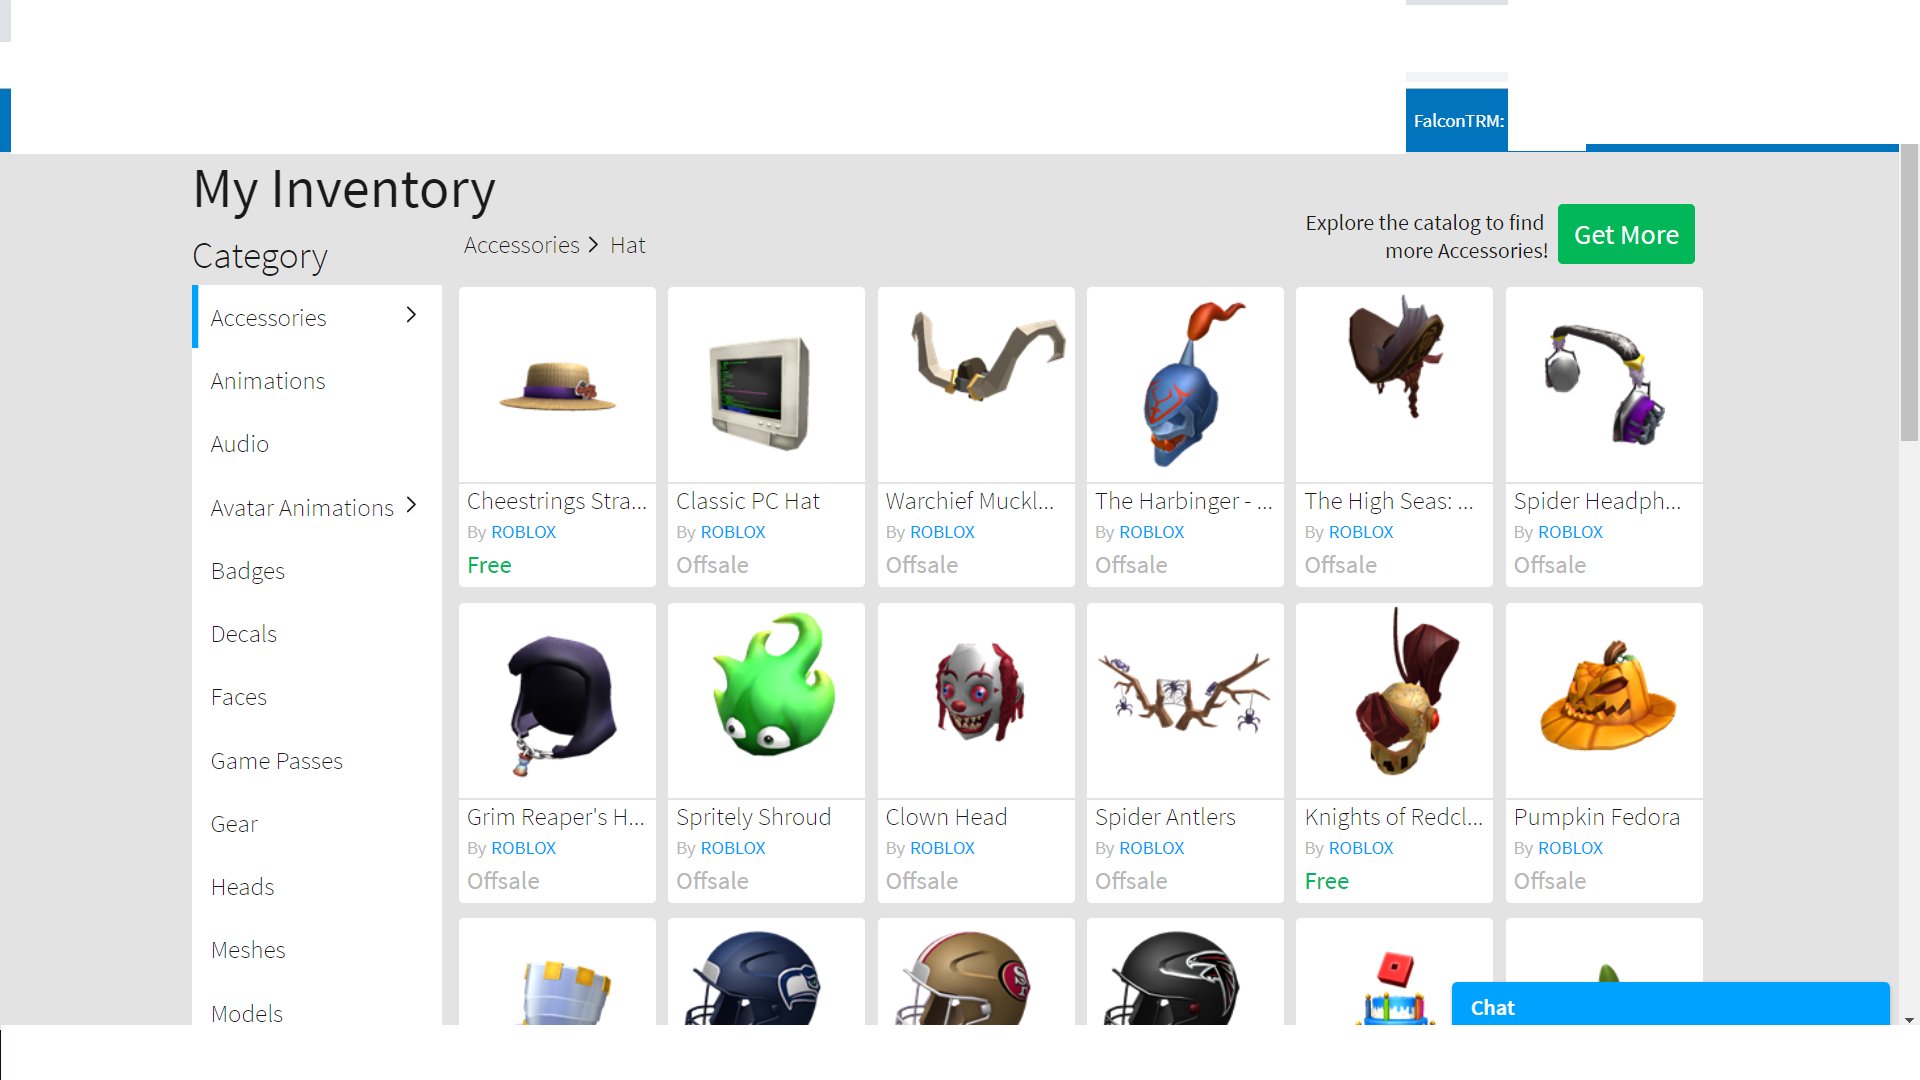 Falcon Phoenix On Twitter Hey Novalystudios And Roblox I Got More Than 50 Kills In Bandit Sim And I Bought The Roblox Logo Crate But I Didn T Got The Badge Nor The Item - roblox how to see offsale audios